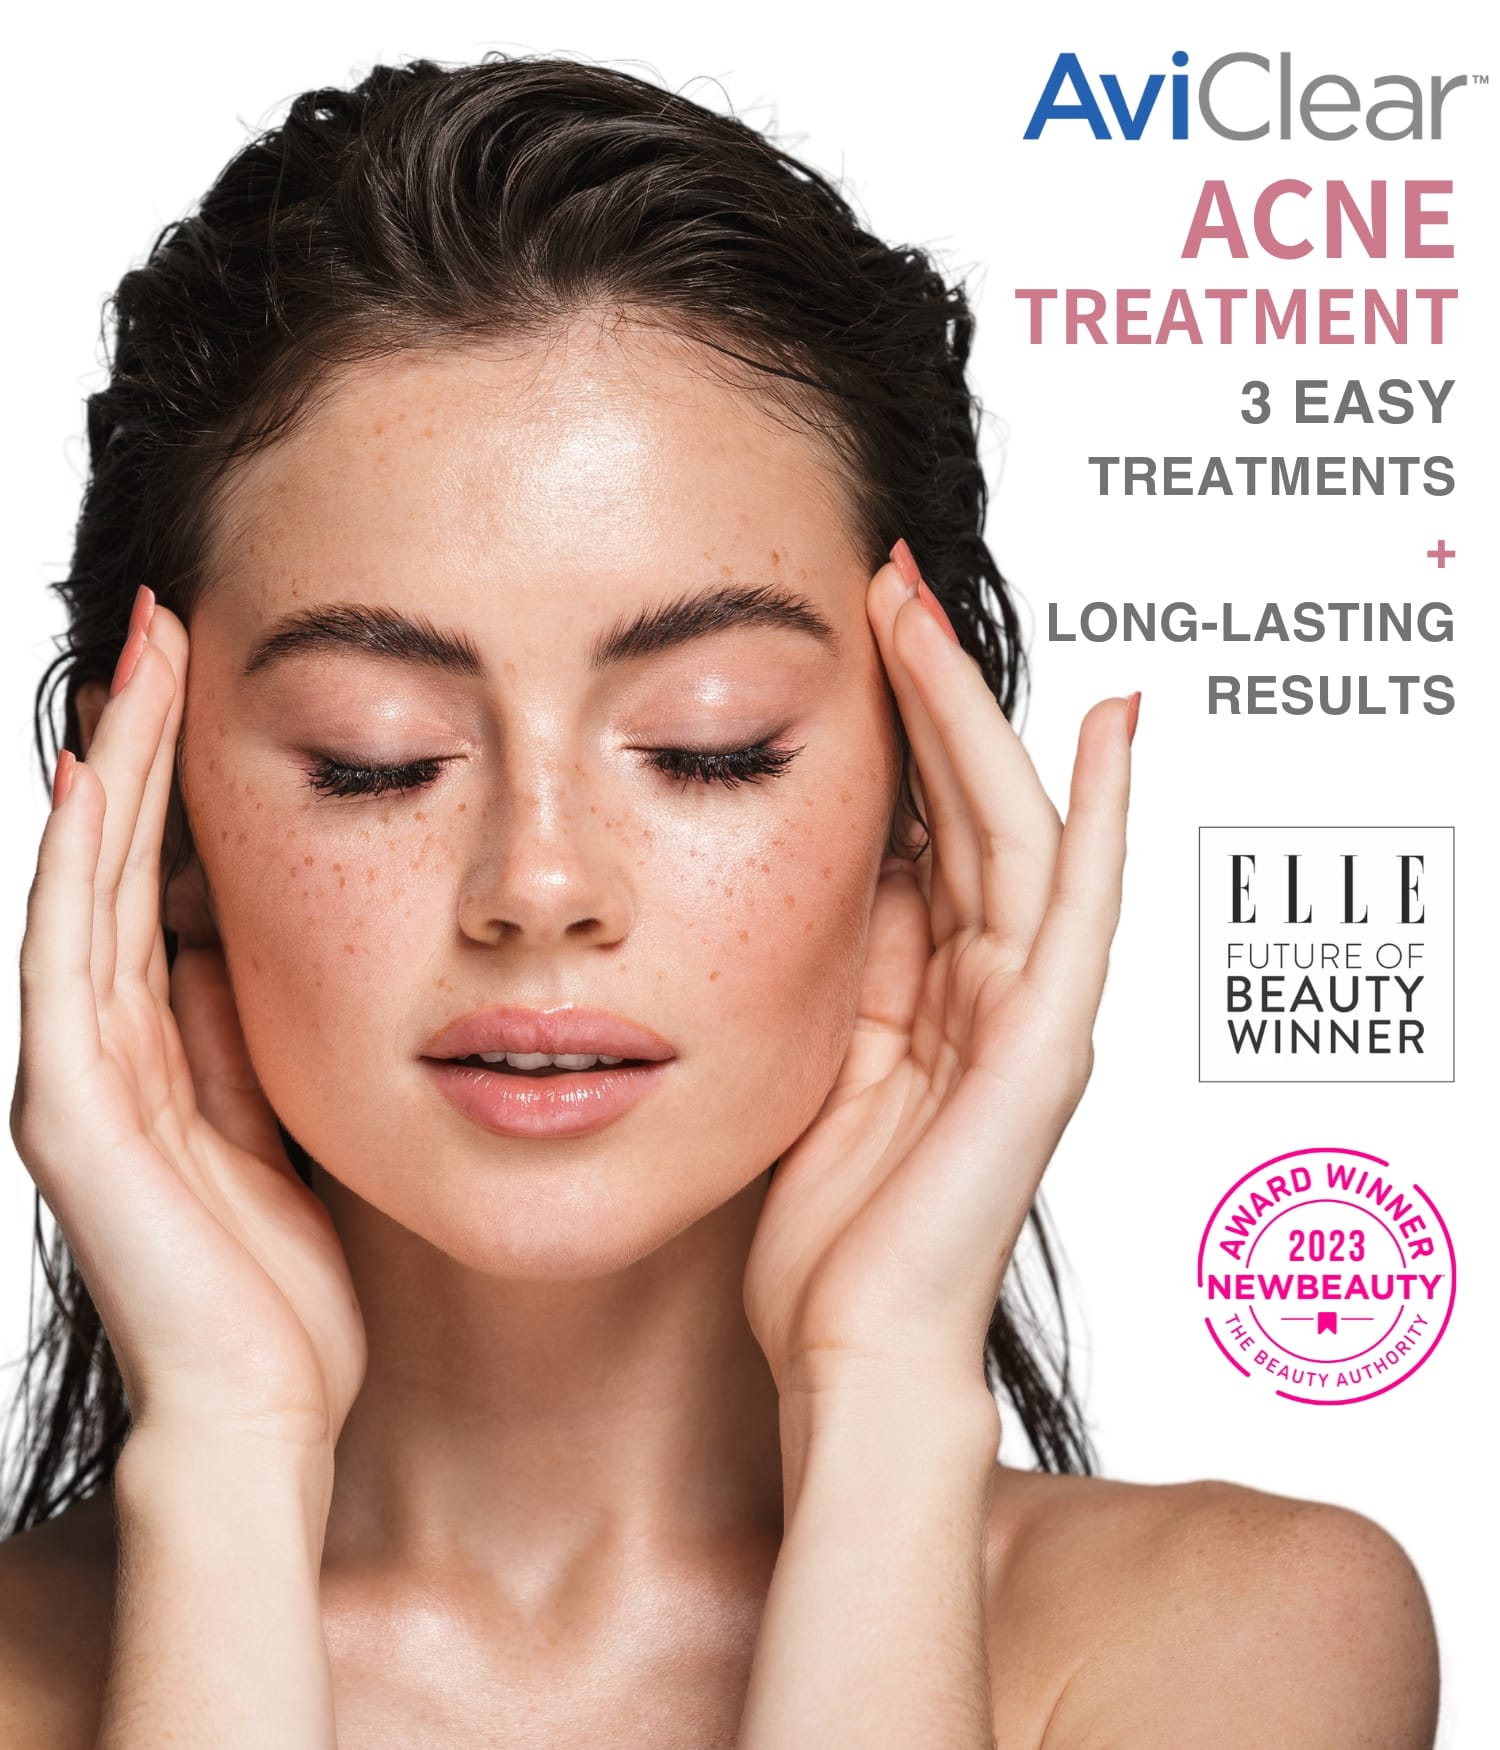 Brunette woman promoting AviClear - an Acne treatment offered at KP Aesthetics in Newtown Square, PA